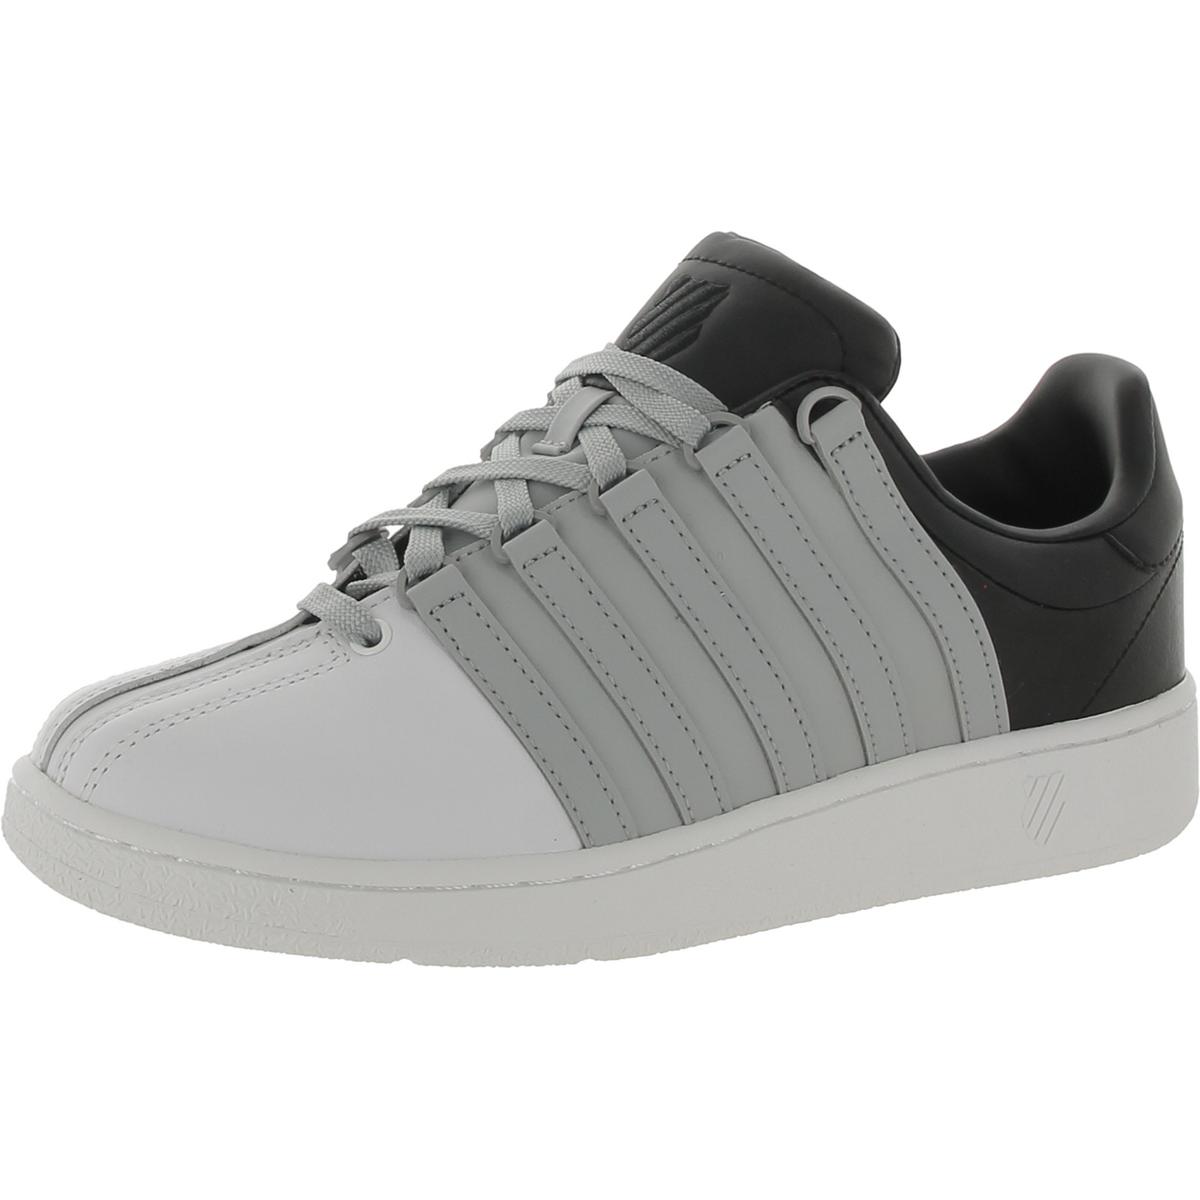 K-Swiss LOW Mens Gym Fitness Casual And Fashion Sneakers